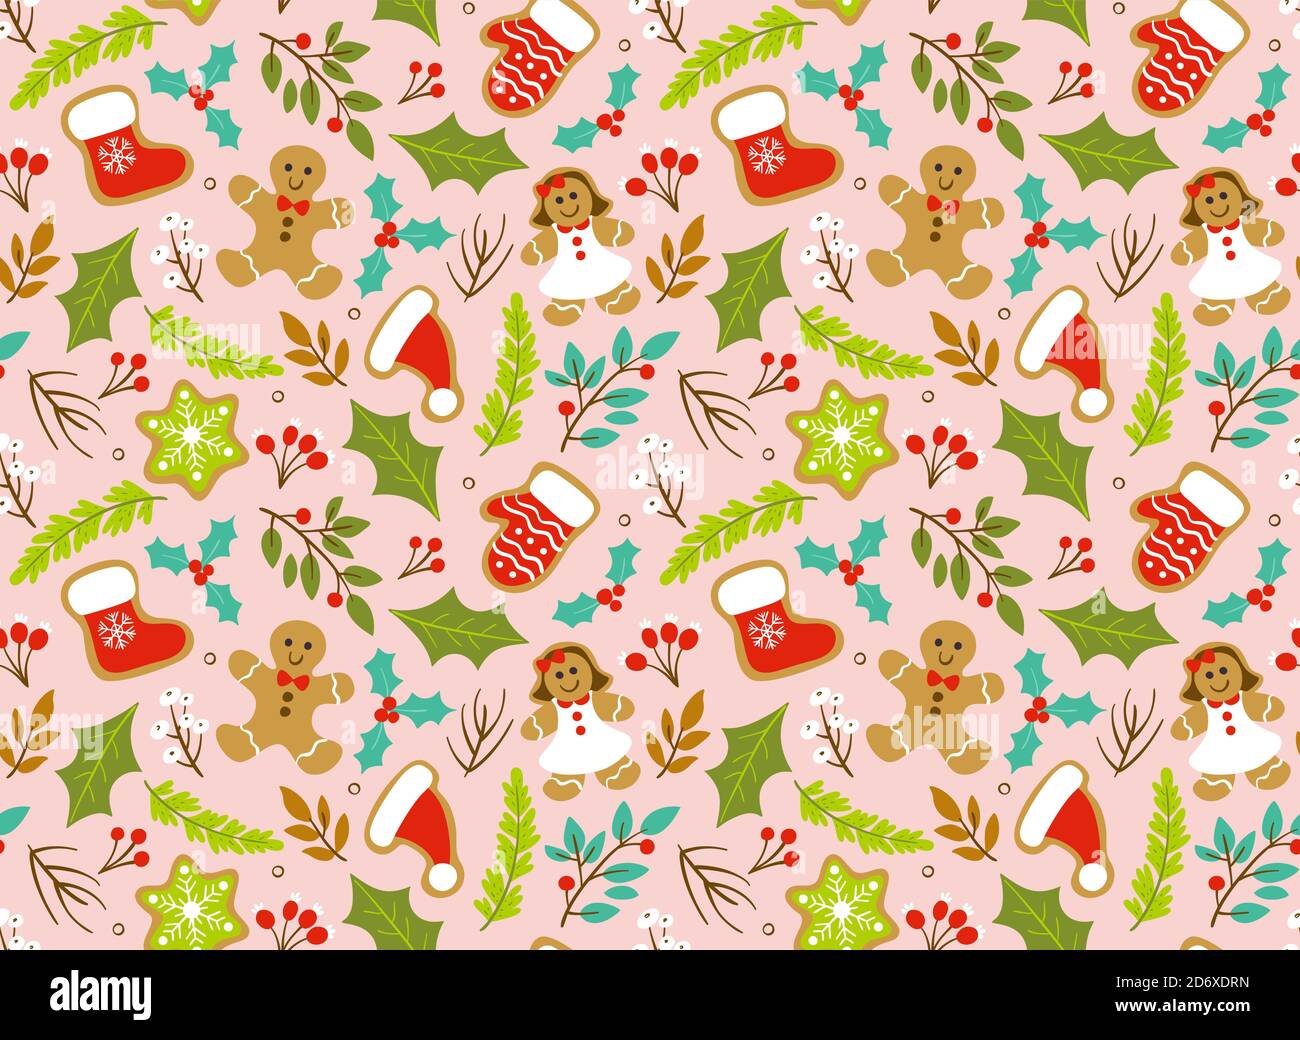 Christmas seamless pattern with seasonal leaves; branches and gingerbread cookies. Pink background. EPS 10 vector illustration. Stock Vector